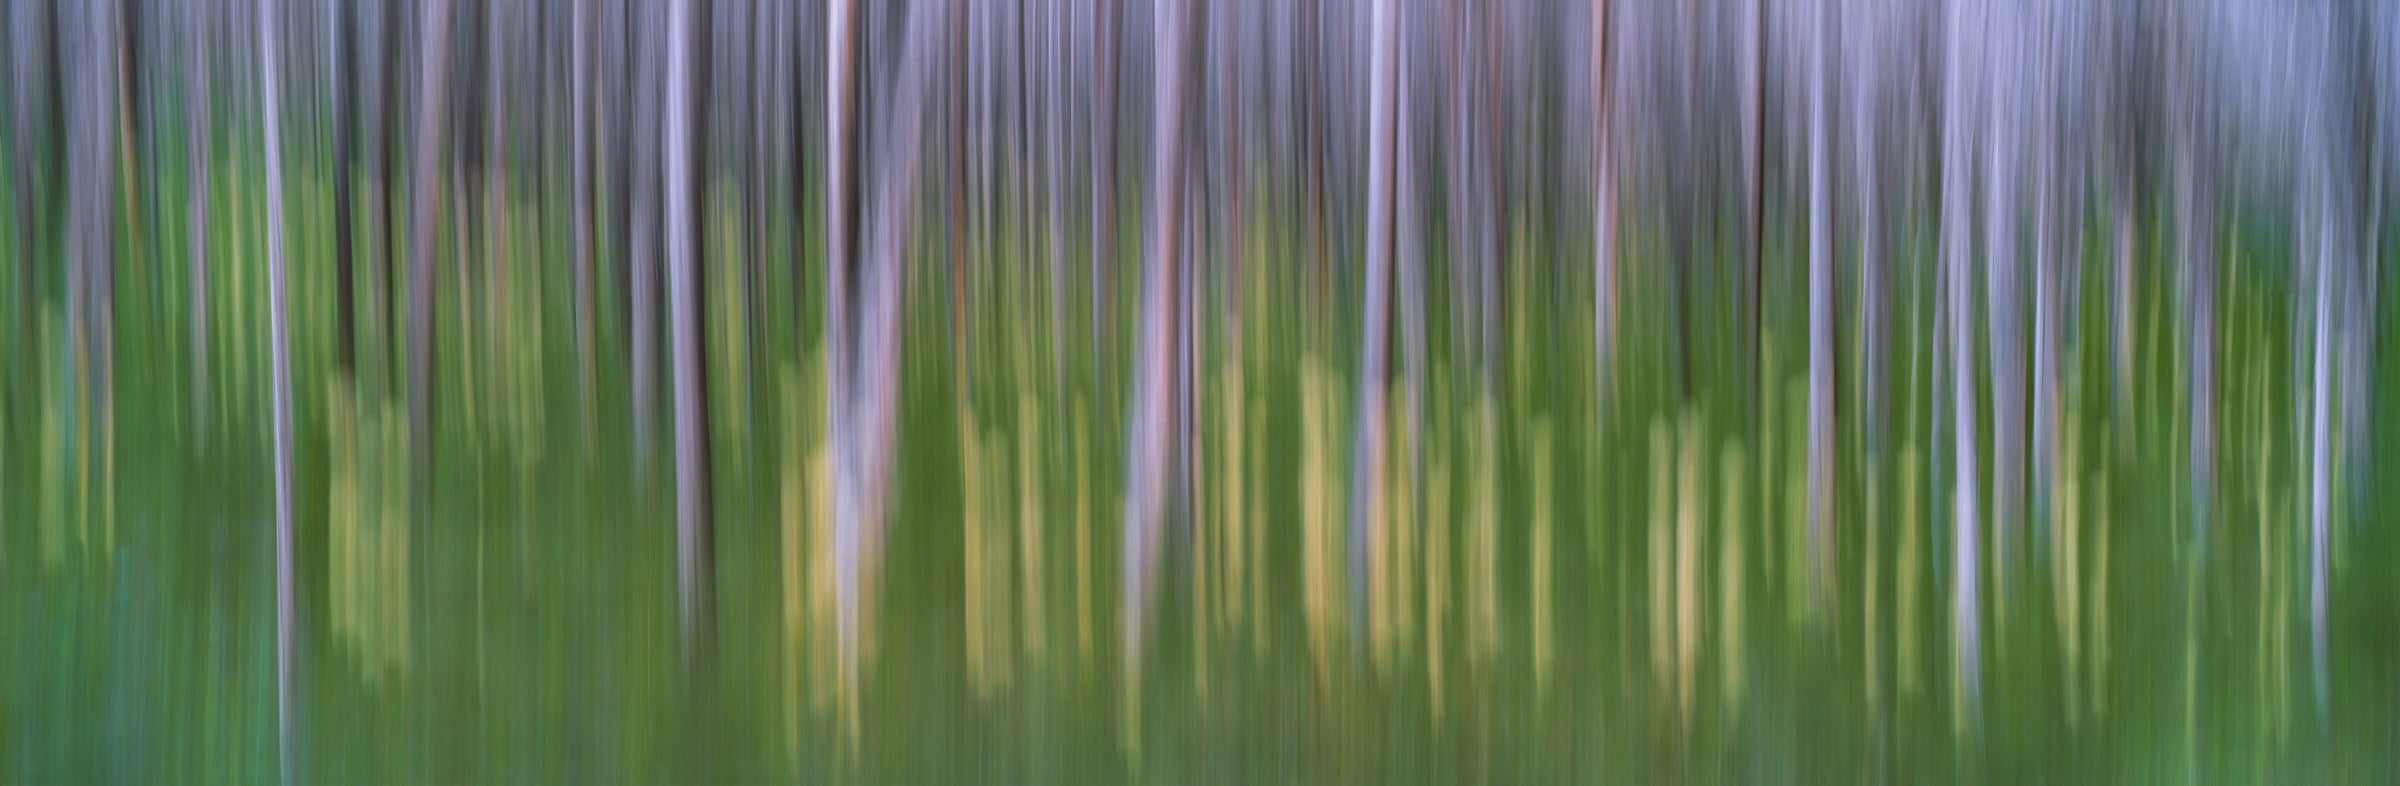 328 megapixels! A very high resolution, large-format abstract photo print of a forest nature scene; fine art photograph created by Scott Dimond in Waterton National Park, Alberta, Canada